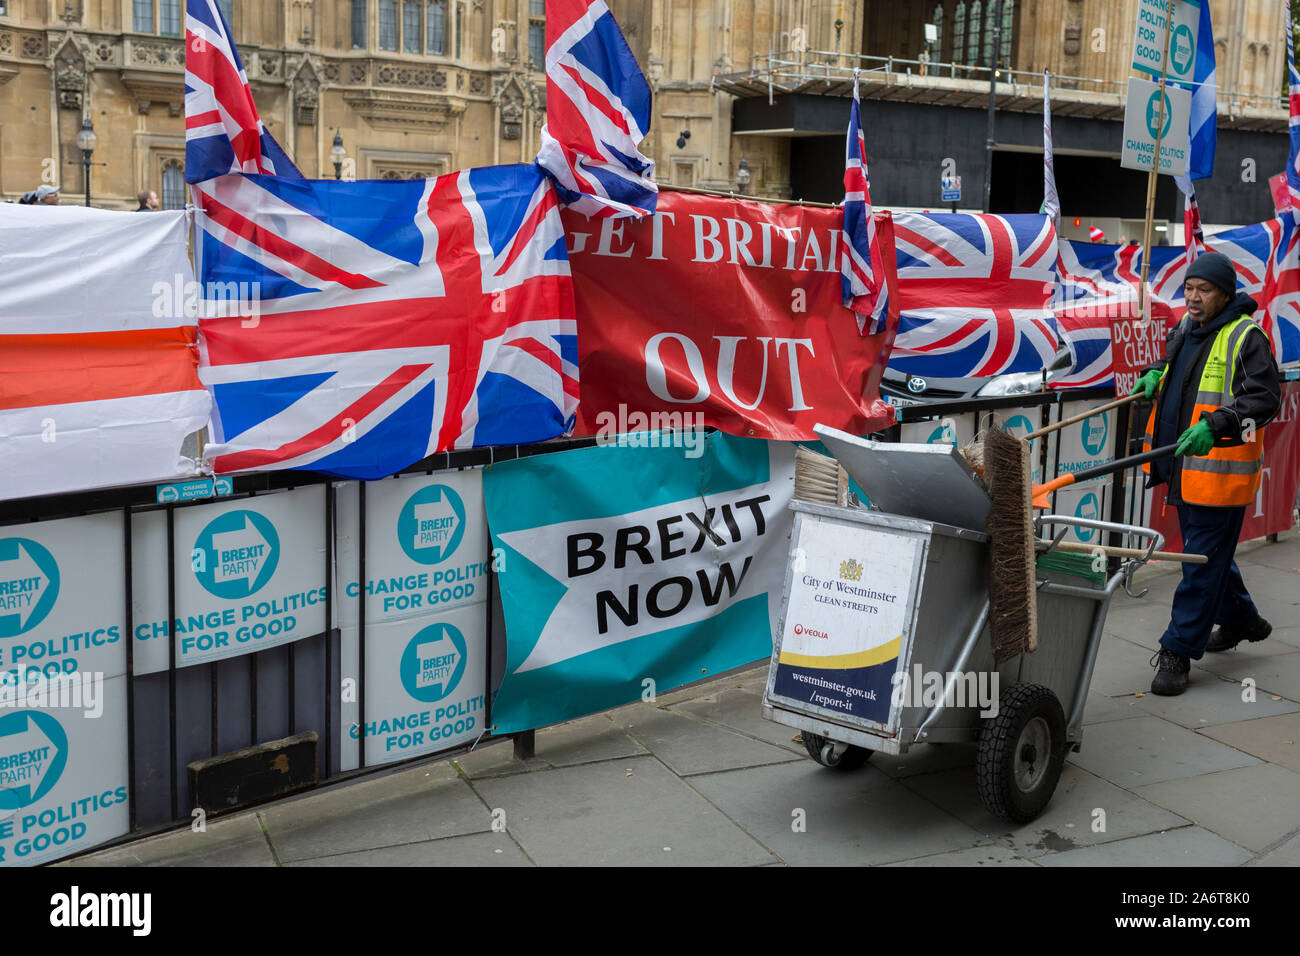 On the day that the EU in Brussels agreed in principle to extend Brexit until 31st January 2020 (aka 'Flextension') and not 31st October 2019, a Westminster borough street cleaner picks up litter next to Brexit Party flags and banners during a Brexit protest outside parliament, on 28th October 2019, in Westminster, London, England. Stock Photo